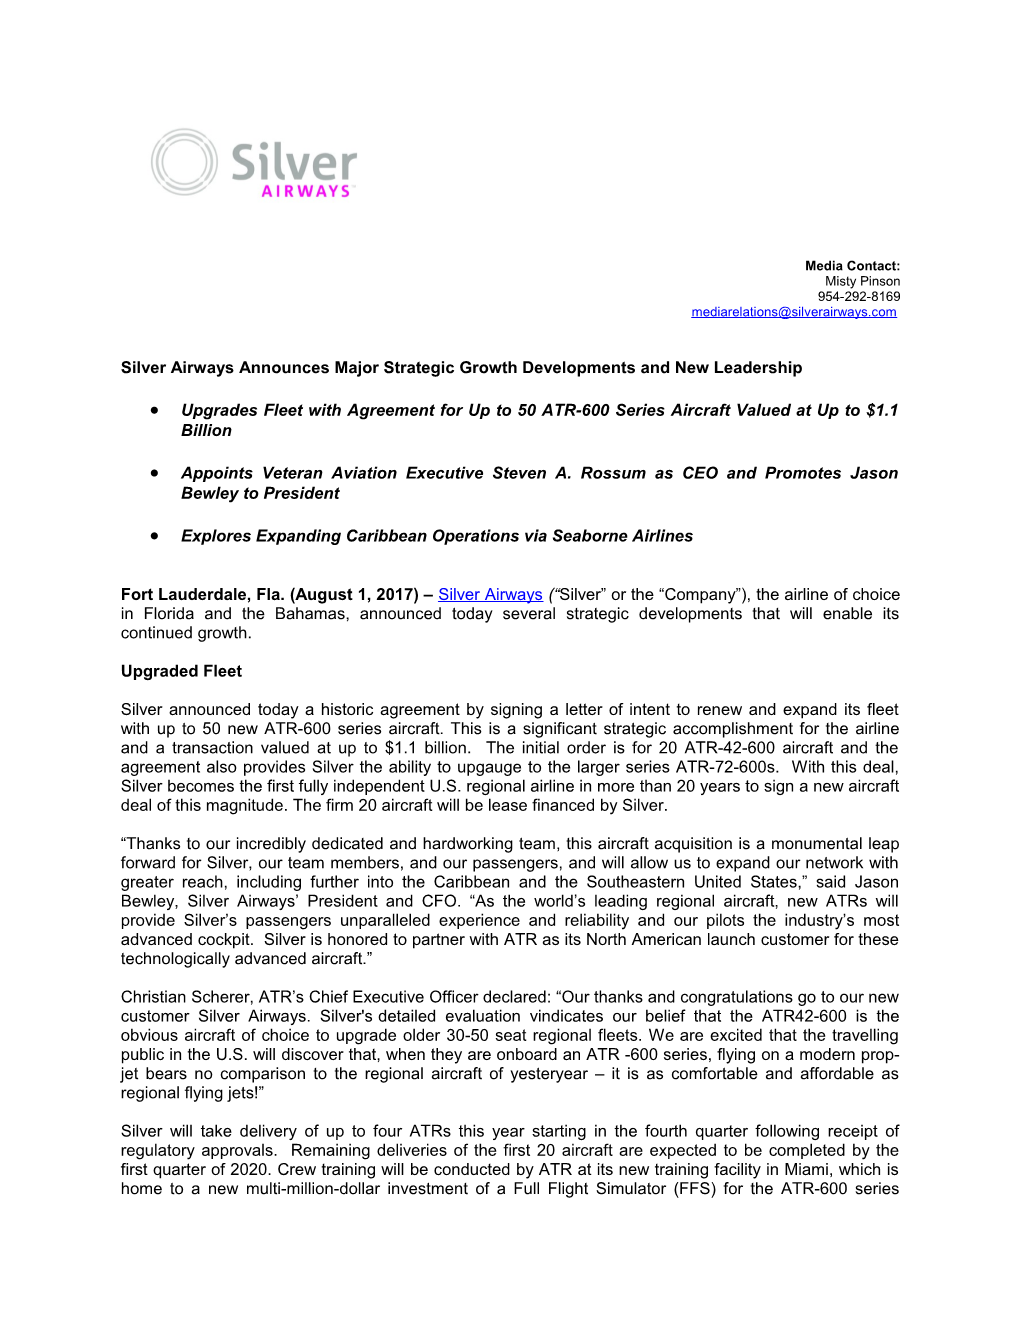 Silver Airways Announces Major Strategic Growth Developments and New Leadership